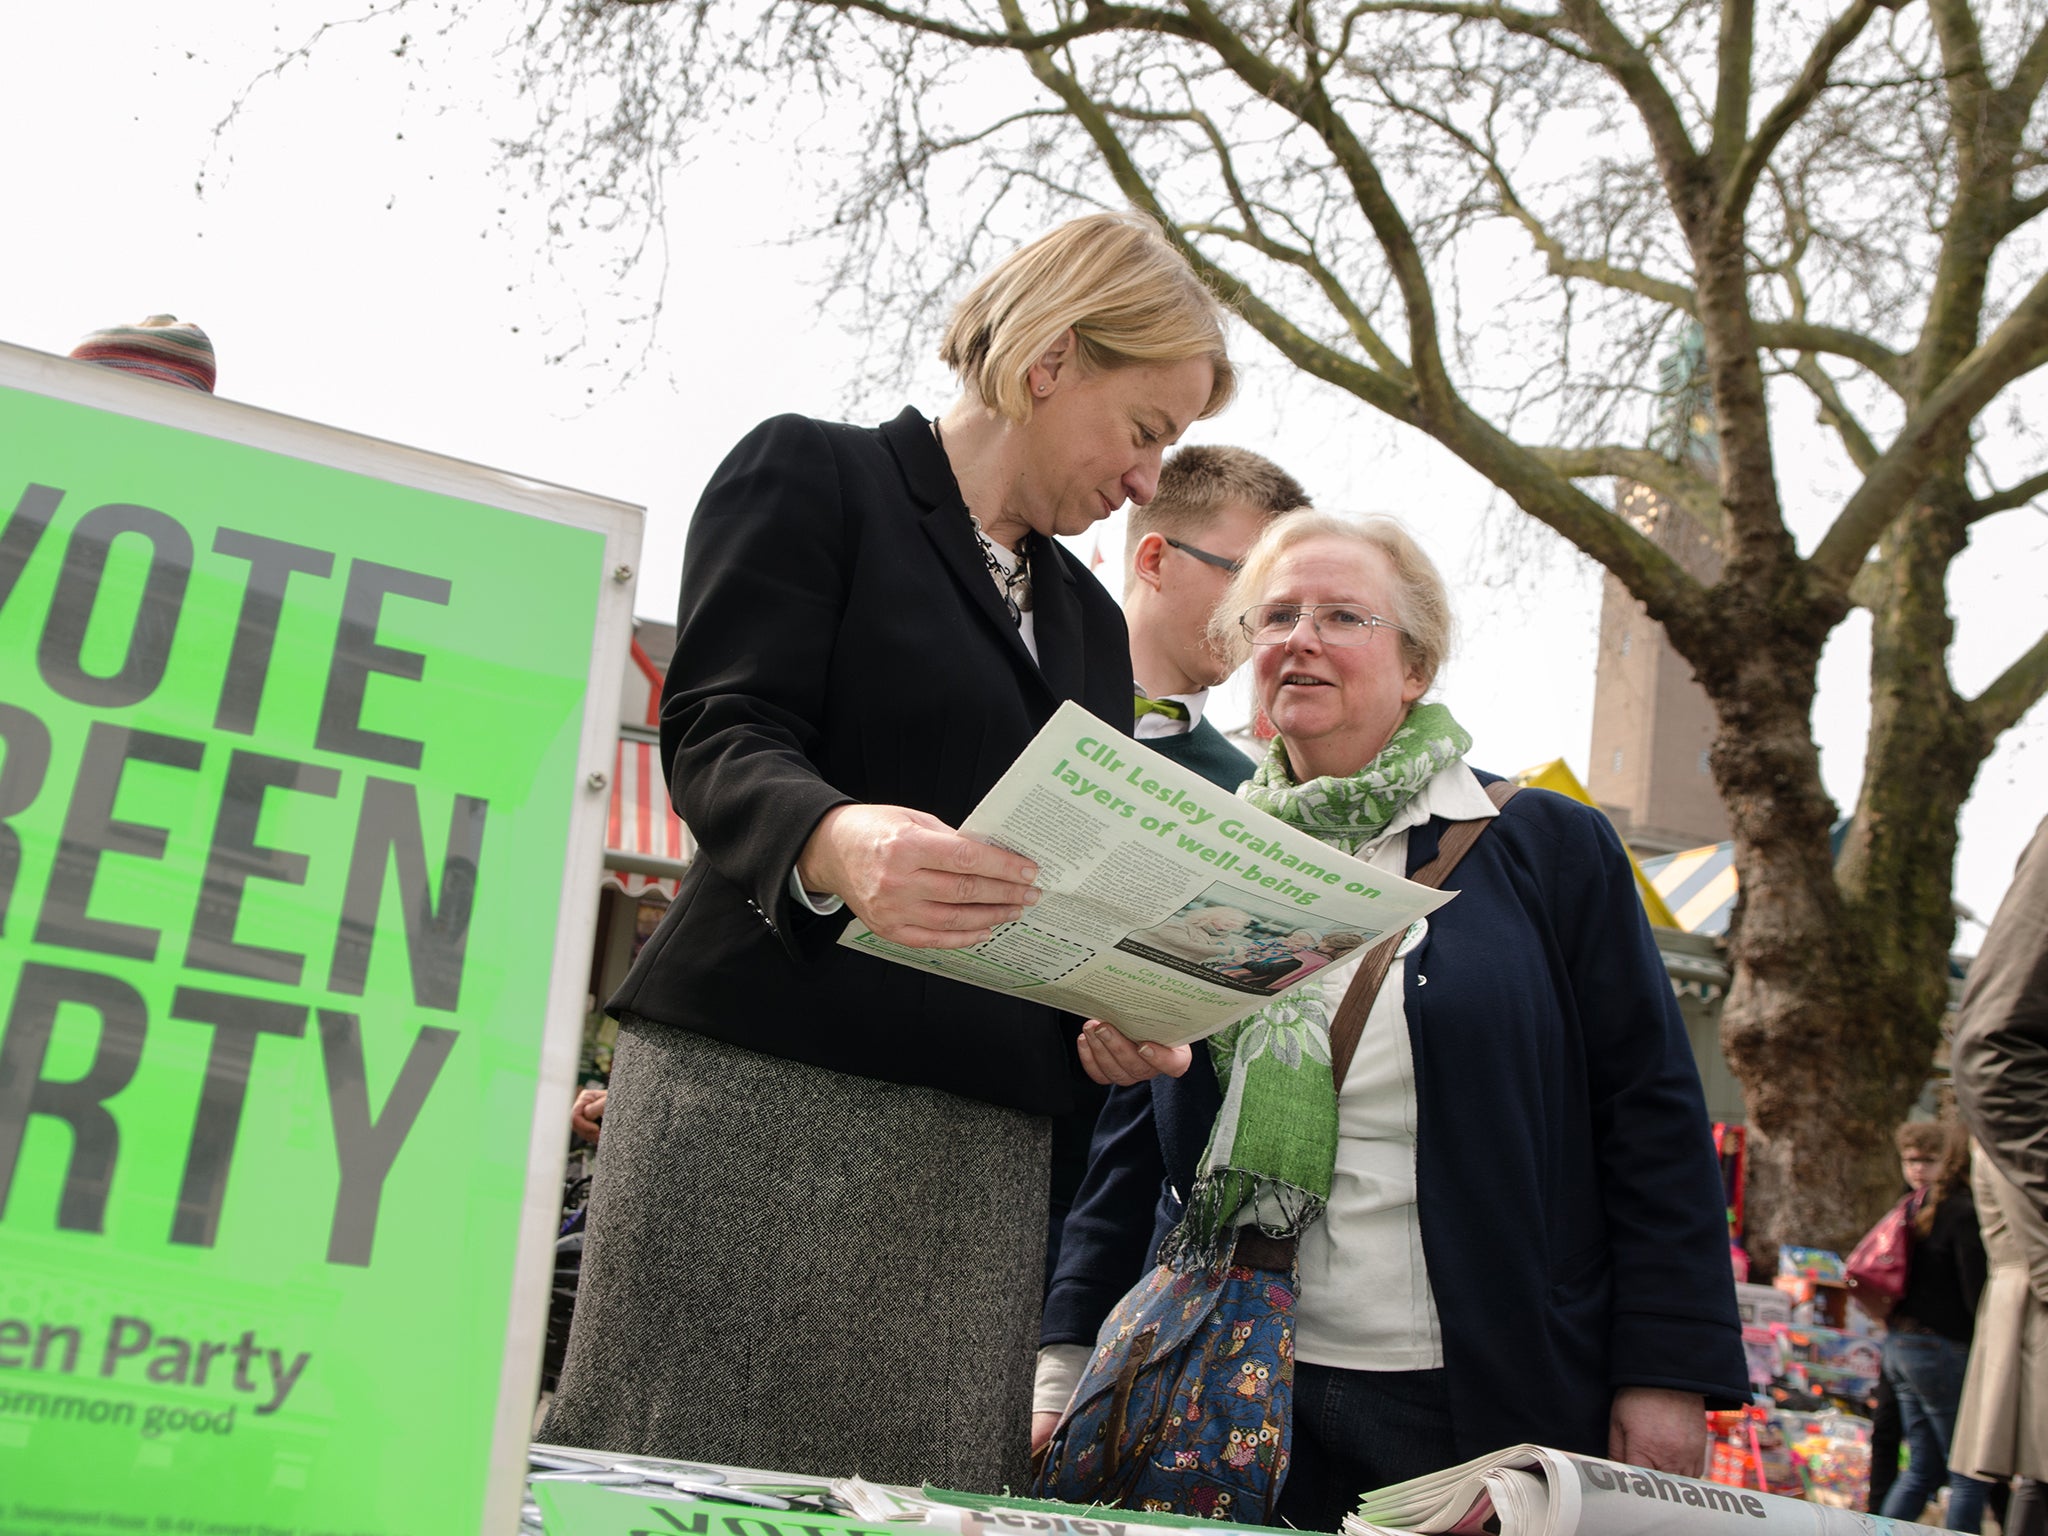 Natalie Bennett in Norwich South, one of 12 target seats for the Green Party